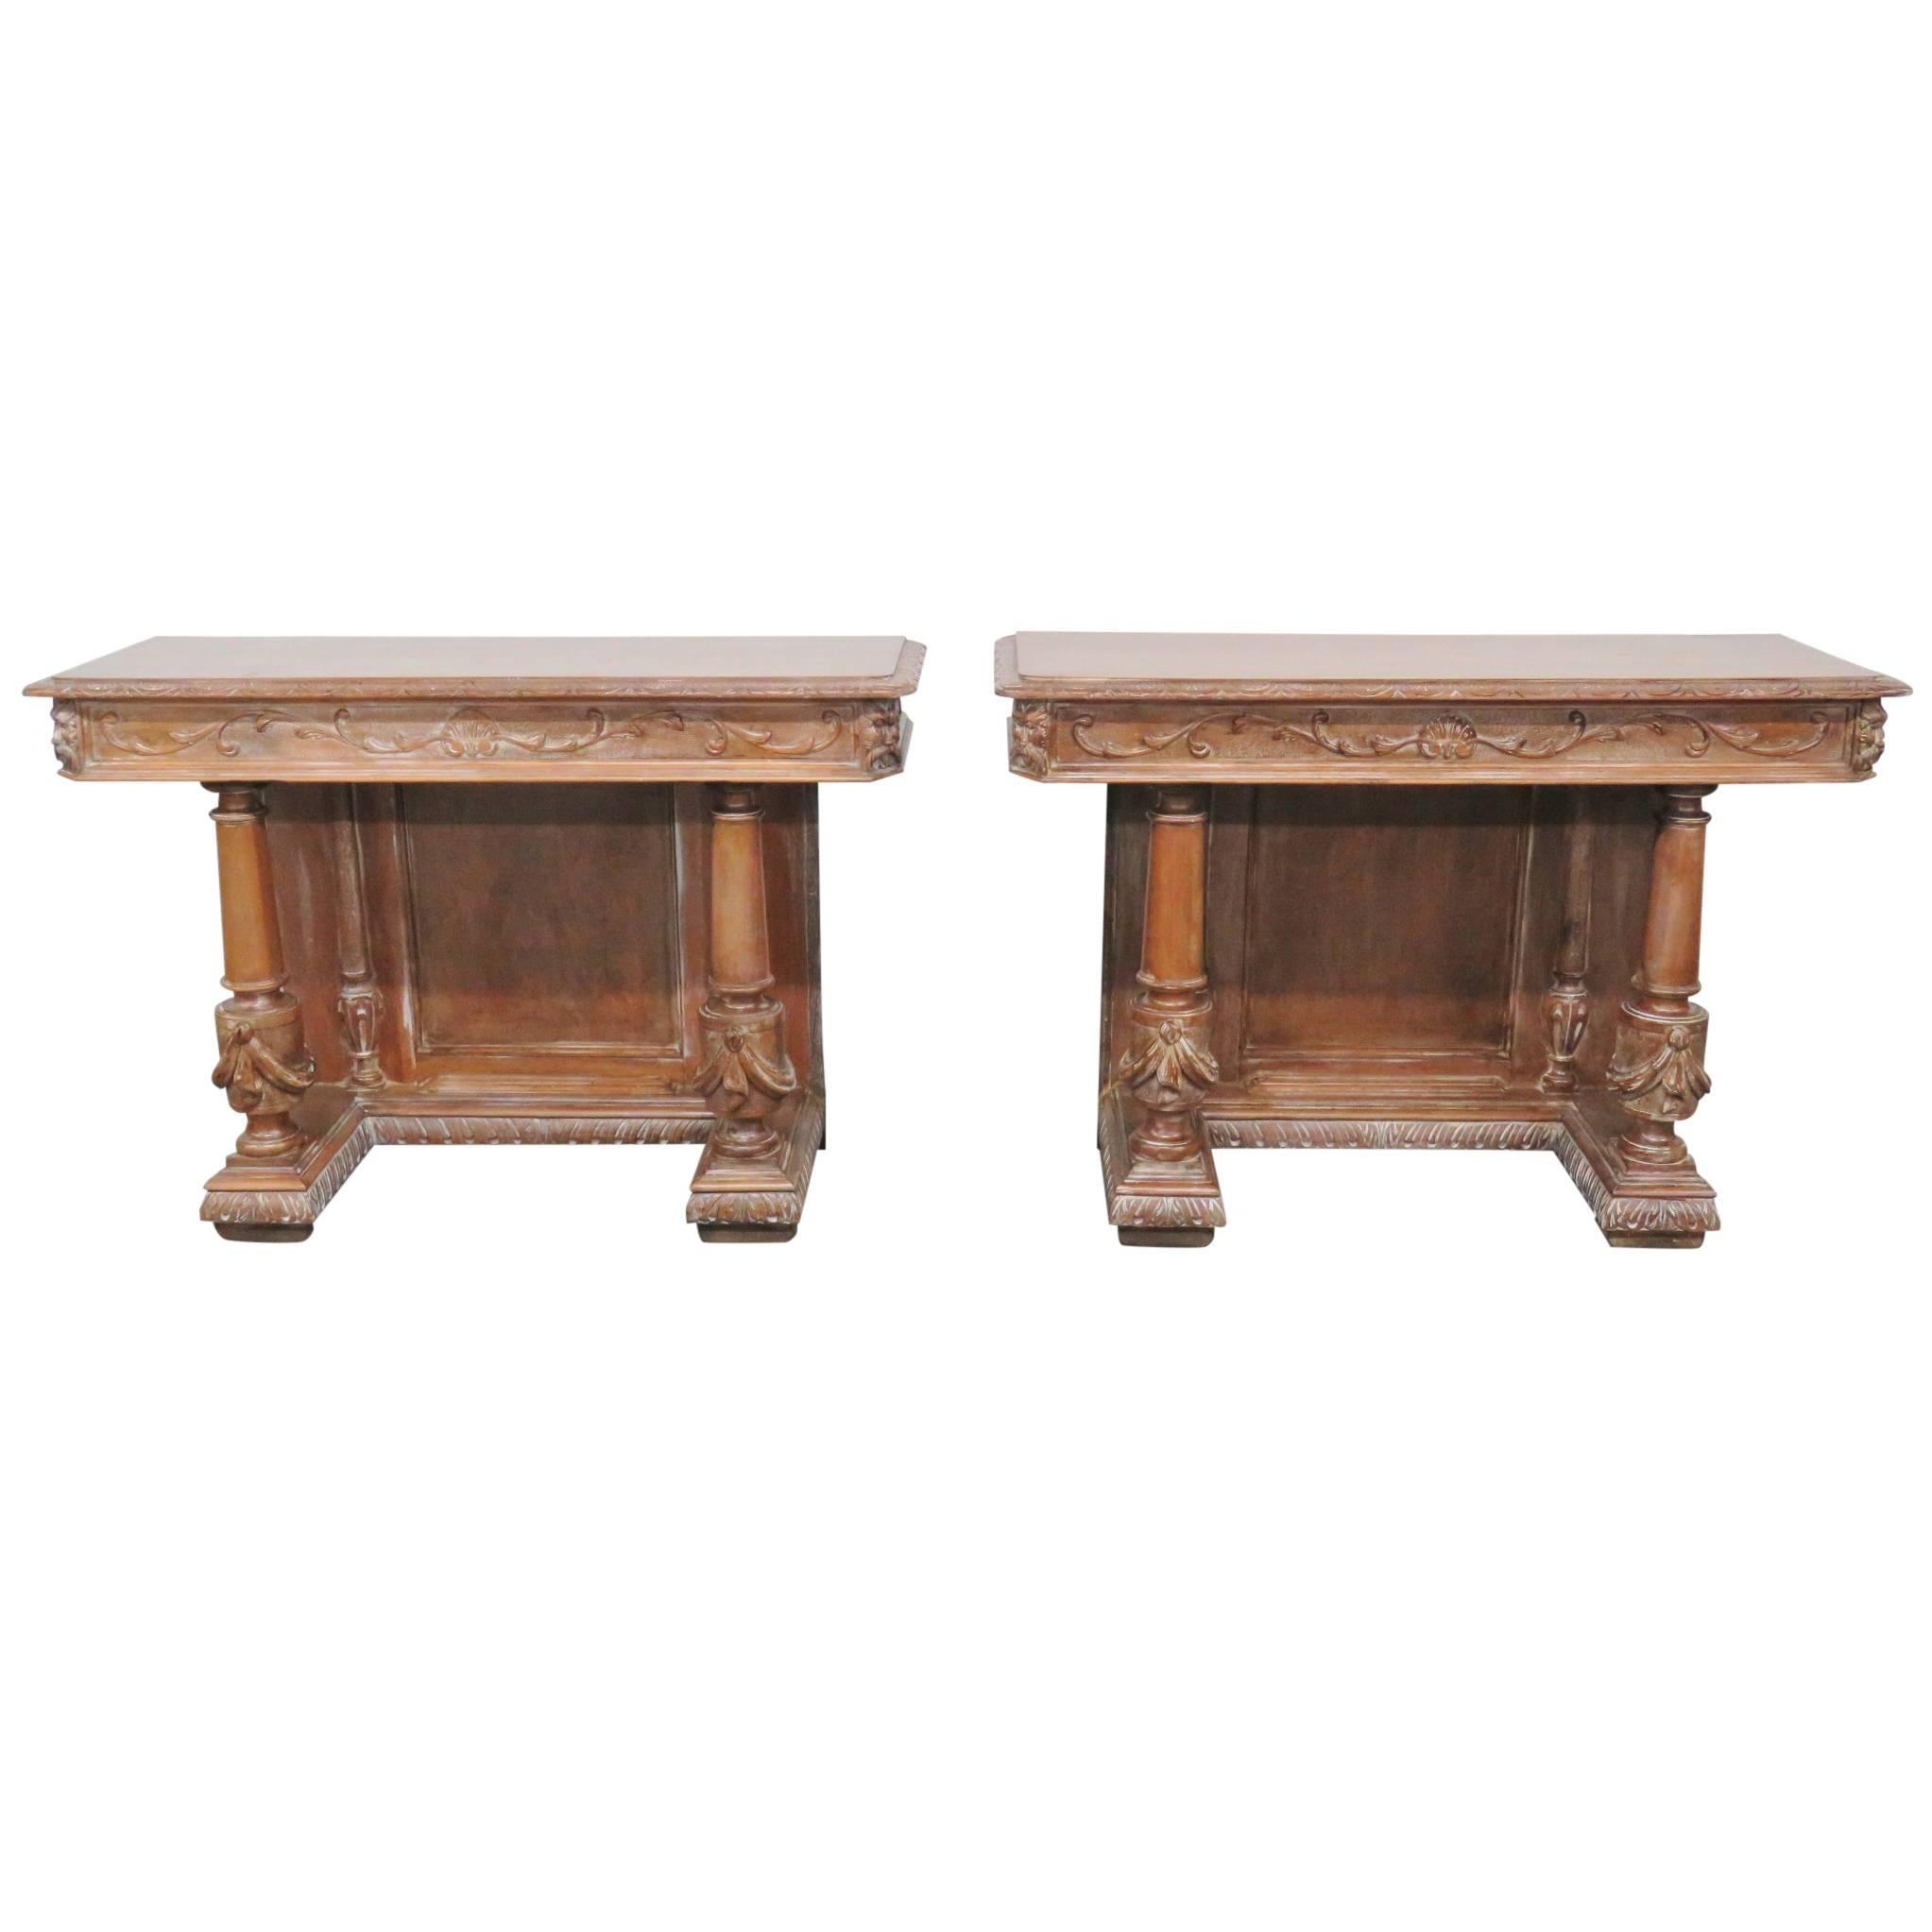 Pair of French Style Distressed Painted Consoles